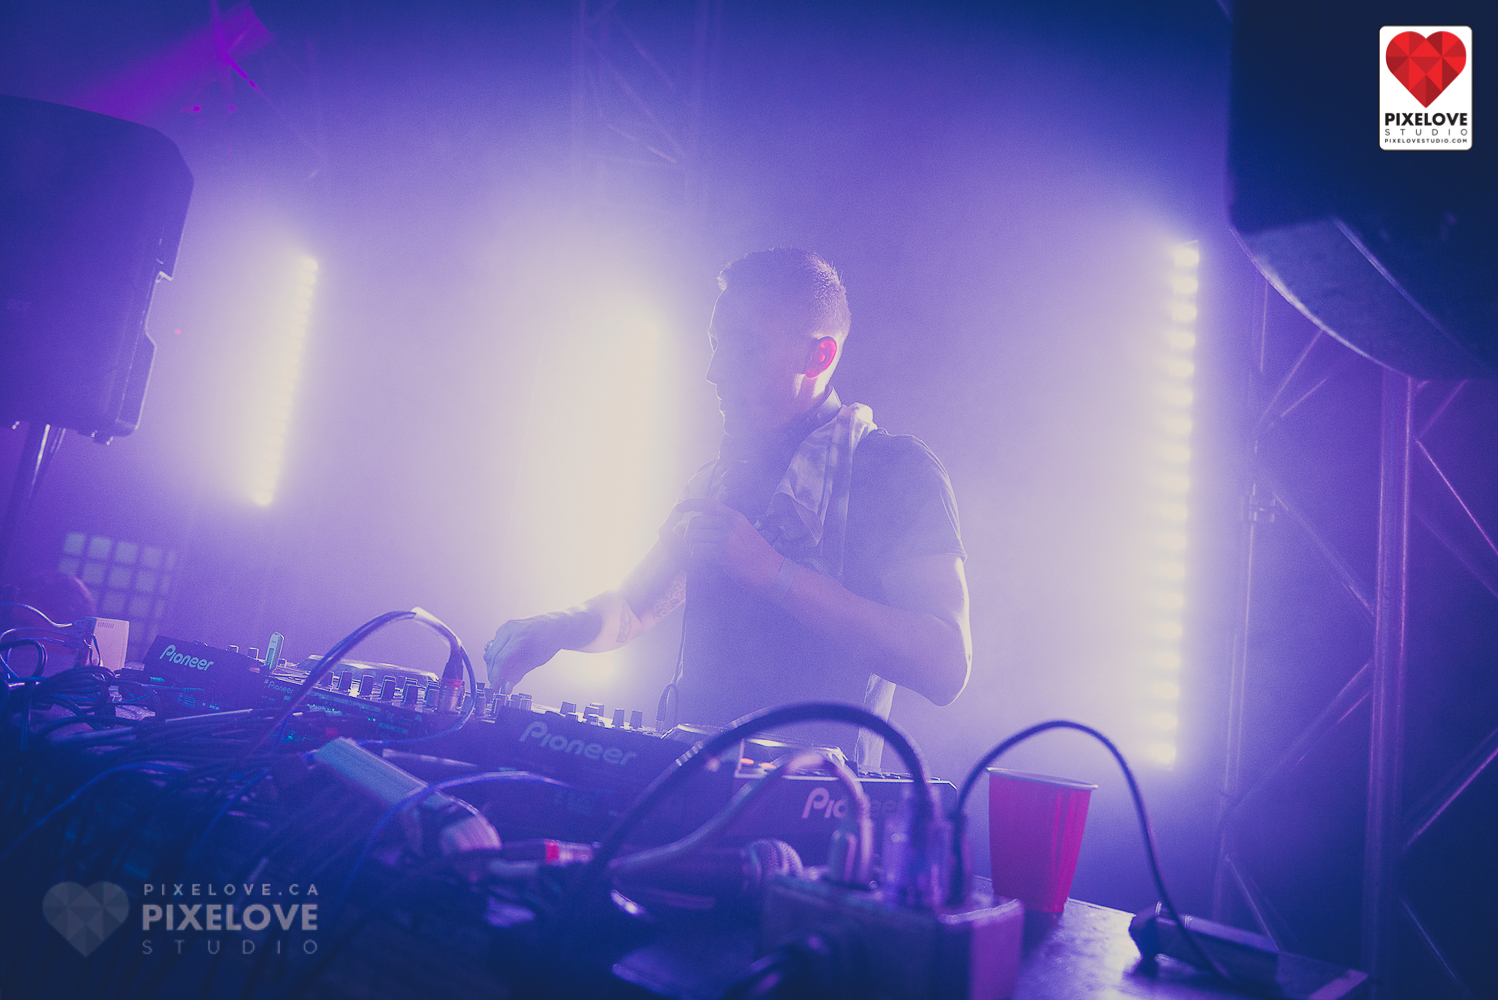 Skins IX electronic music event in Montreal. Photography by Pixelove Studio music photographer in Montreal, Canada.